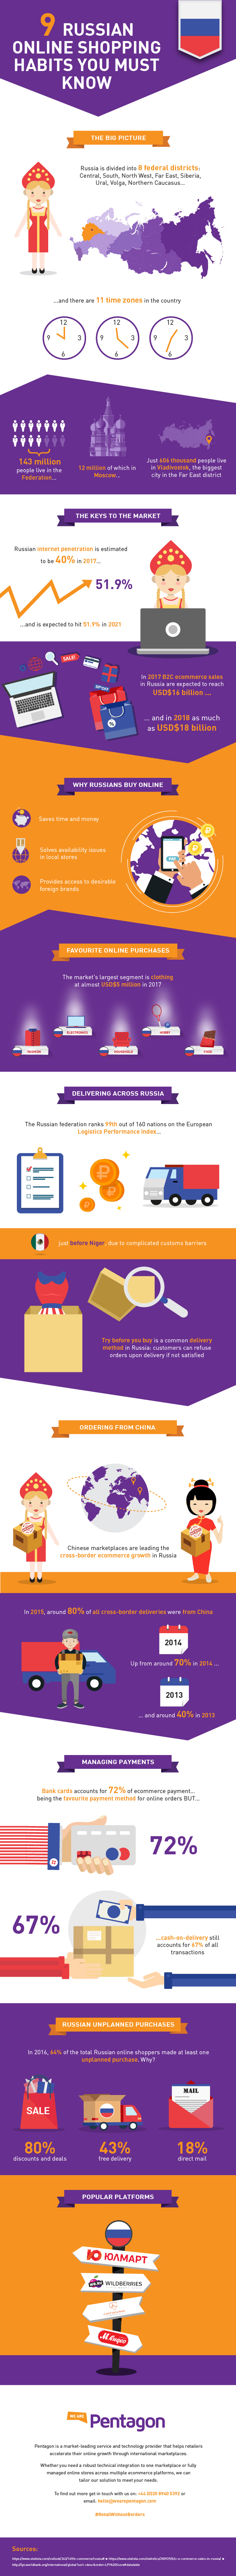 Infographic_shopping_habit_russia